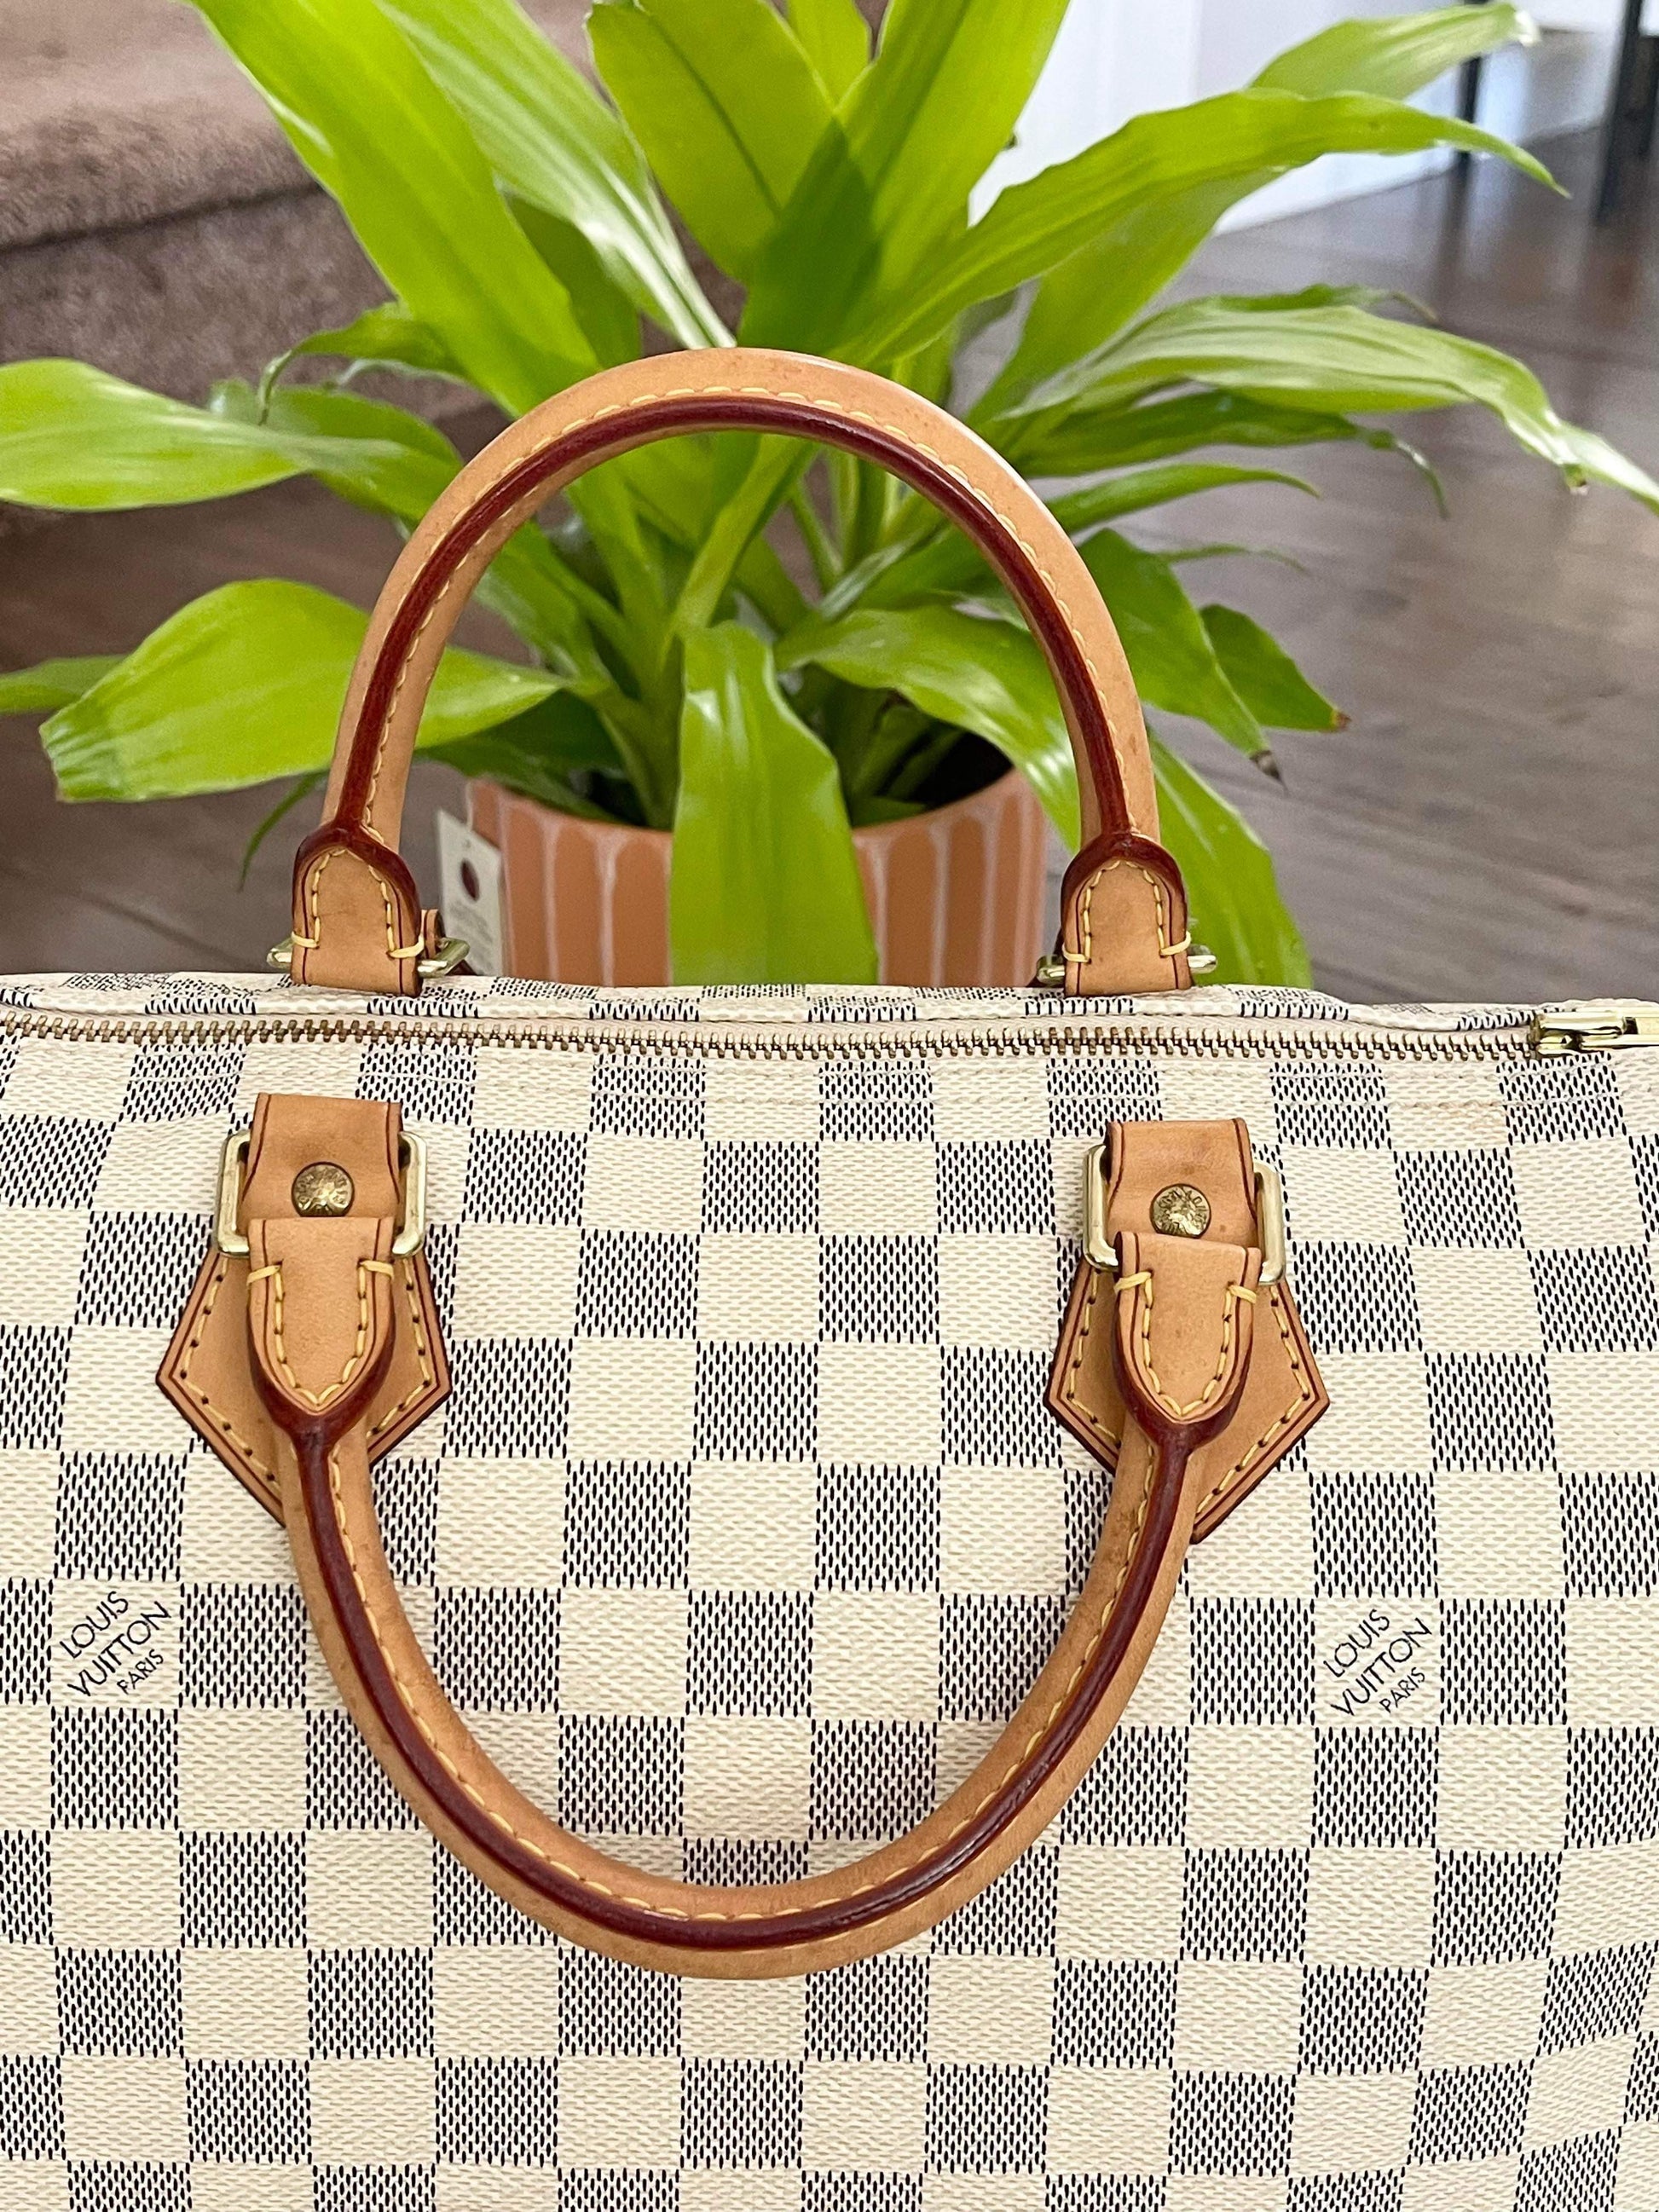 How To Spot Authentic Louis Vuitton Speedy 30 Damier Azur Bag and